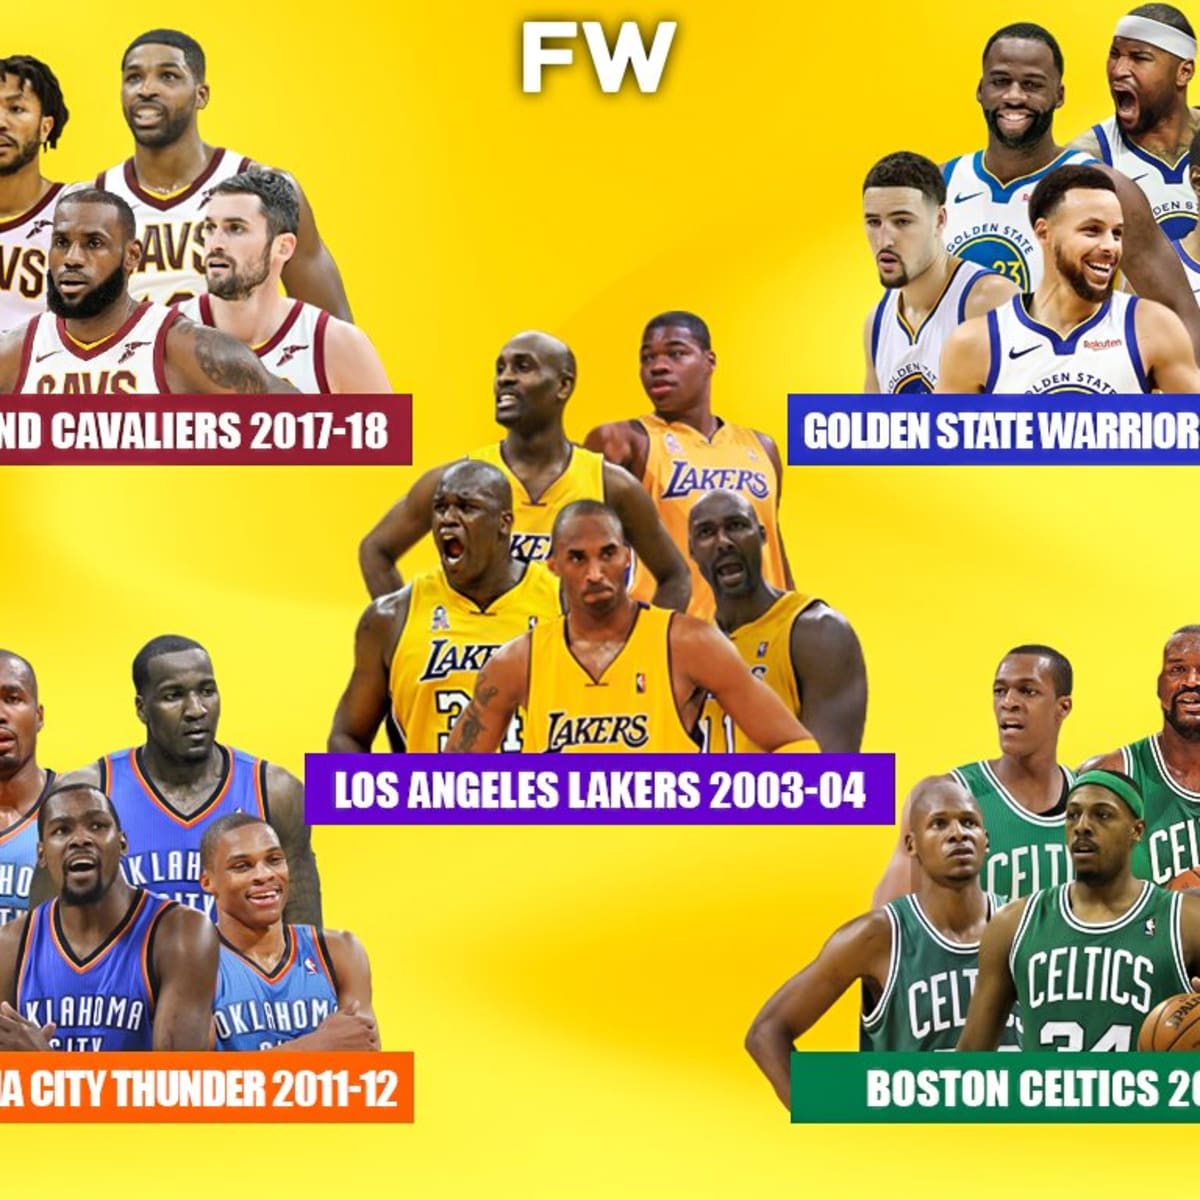 Are the Los Angeles Lakers or Boston Celtics the NBA's best team ever?